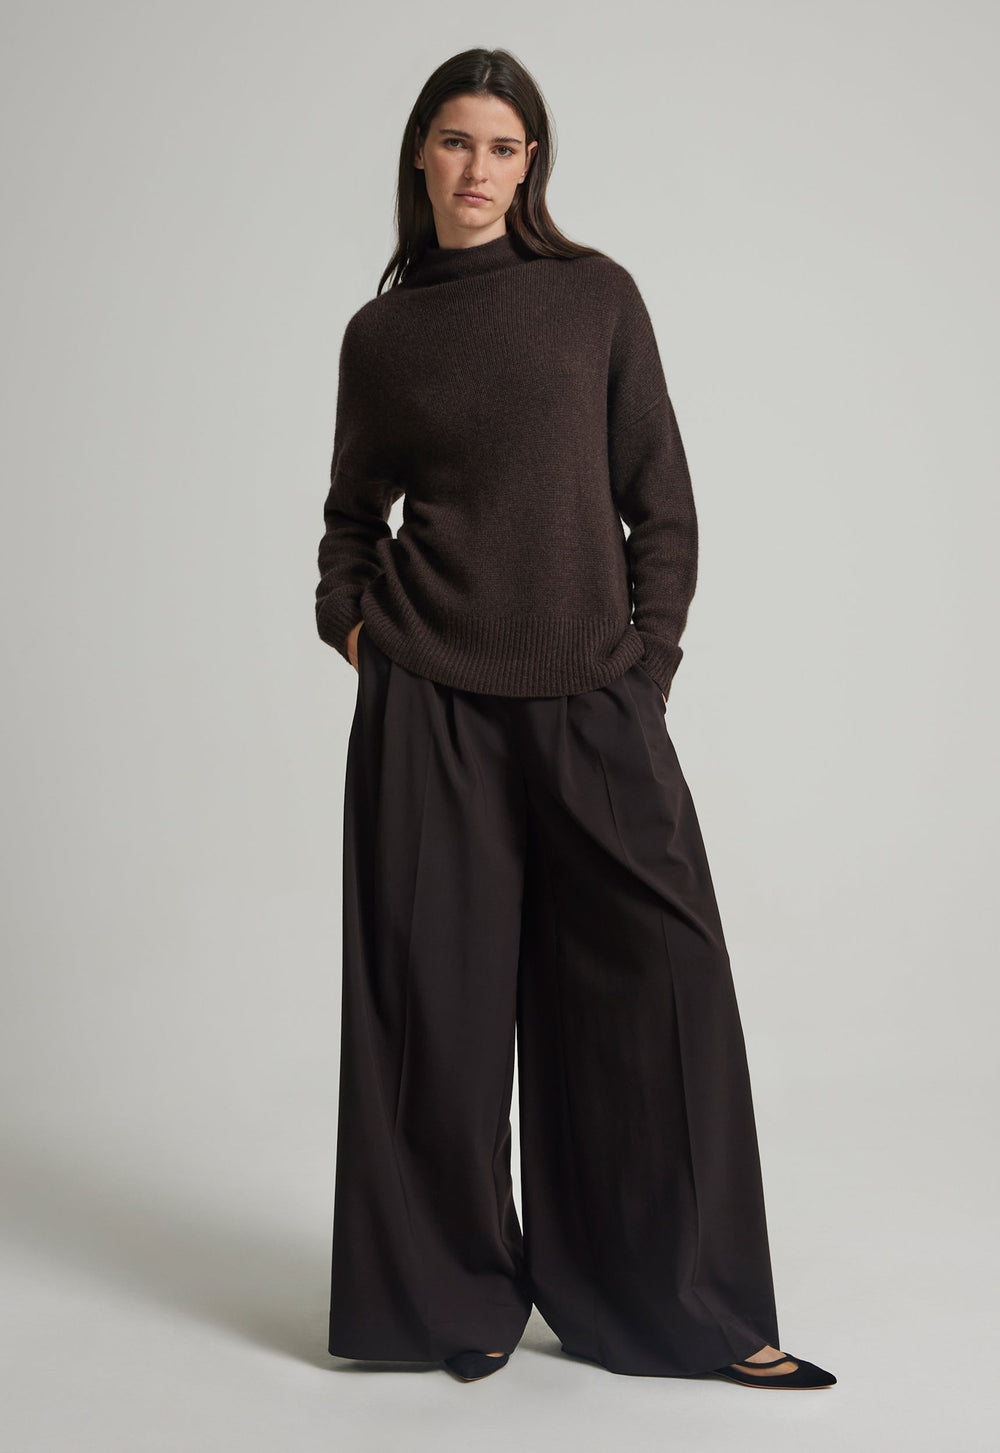 Jac+Jack MAISON WOOL PANT in Chocolate Pepper